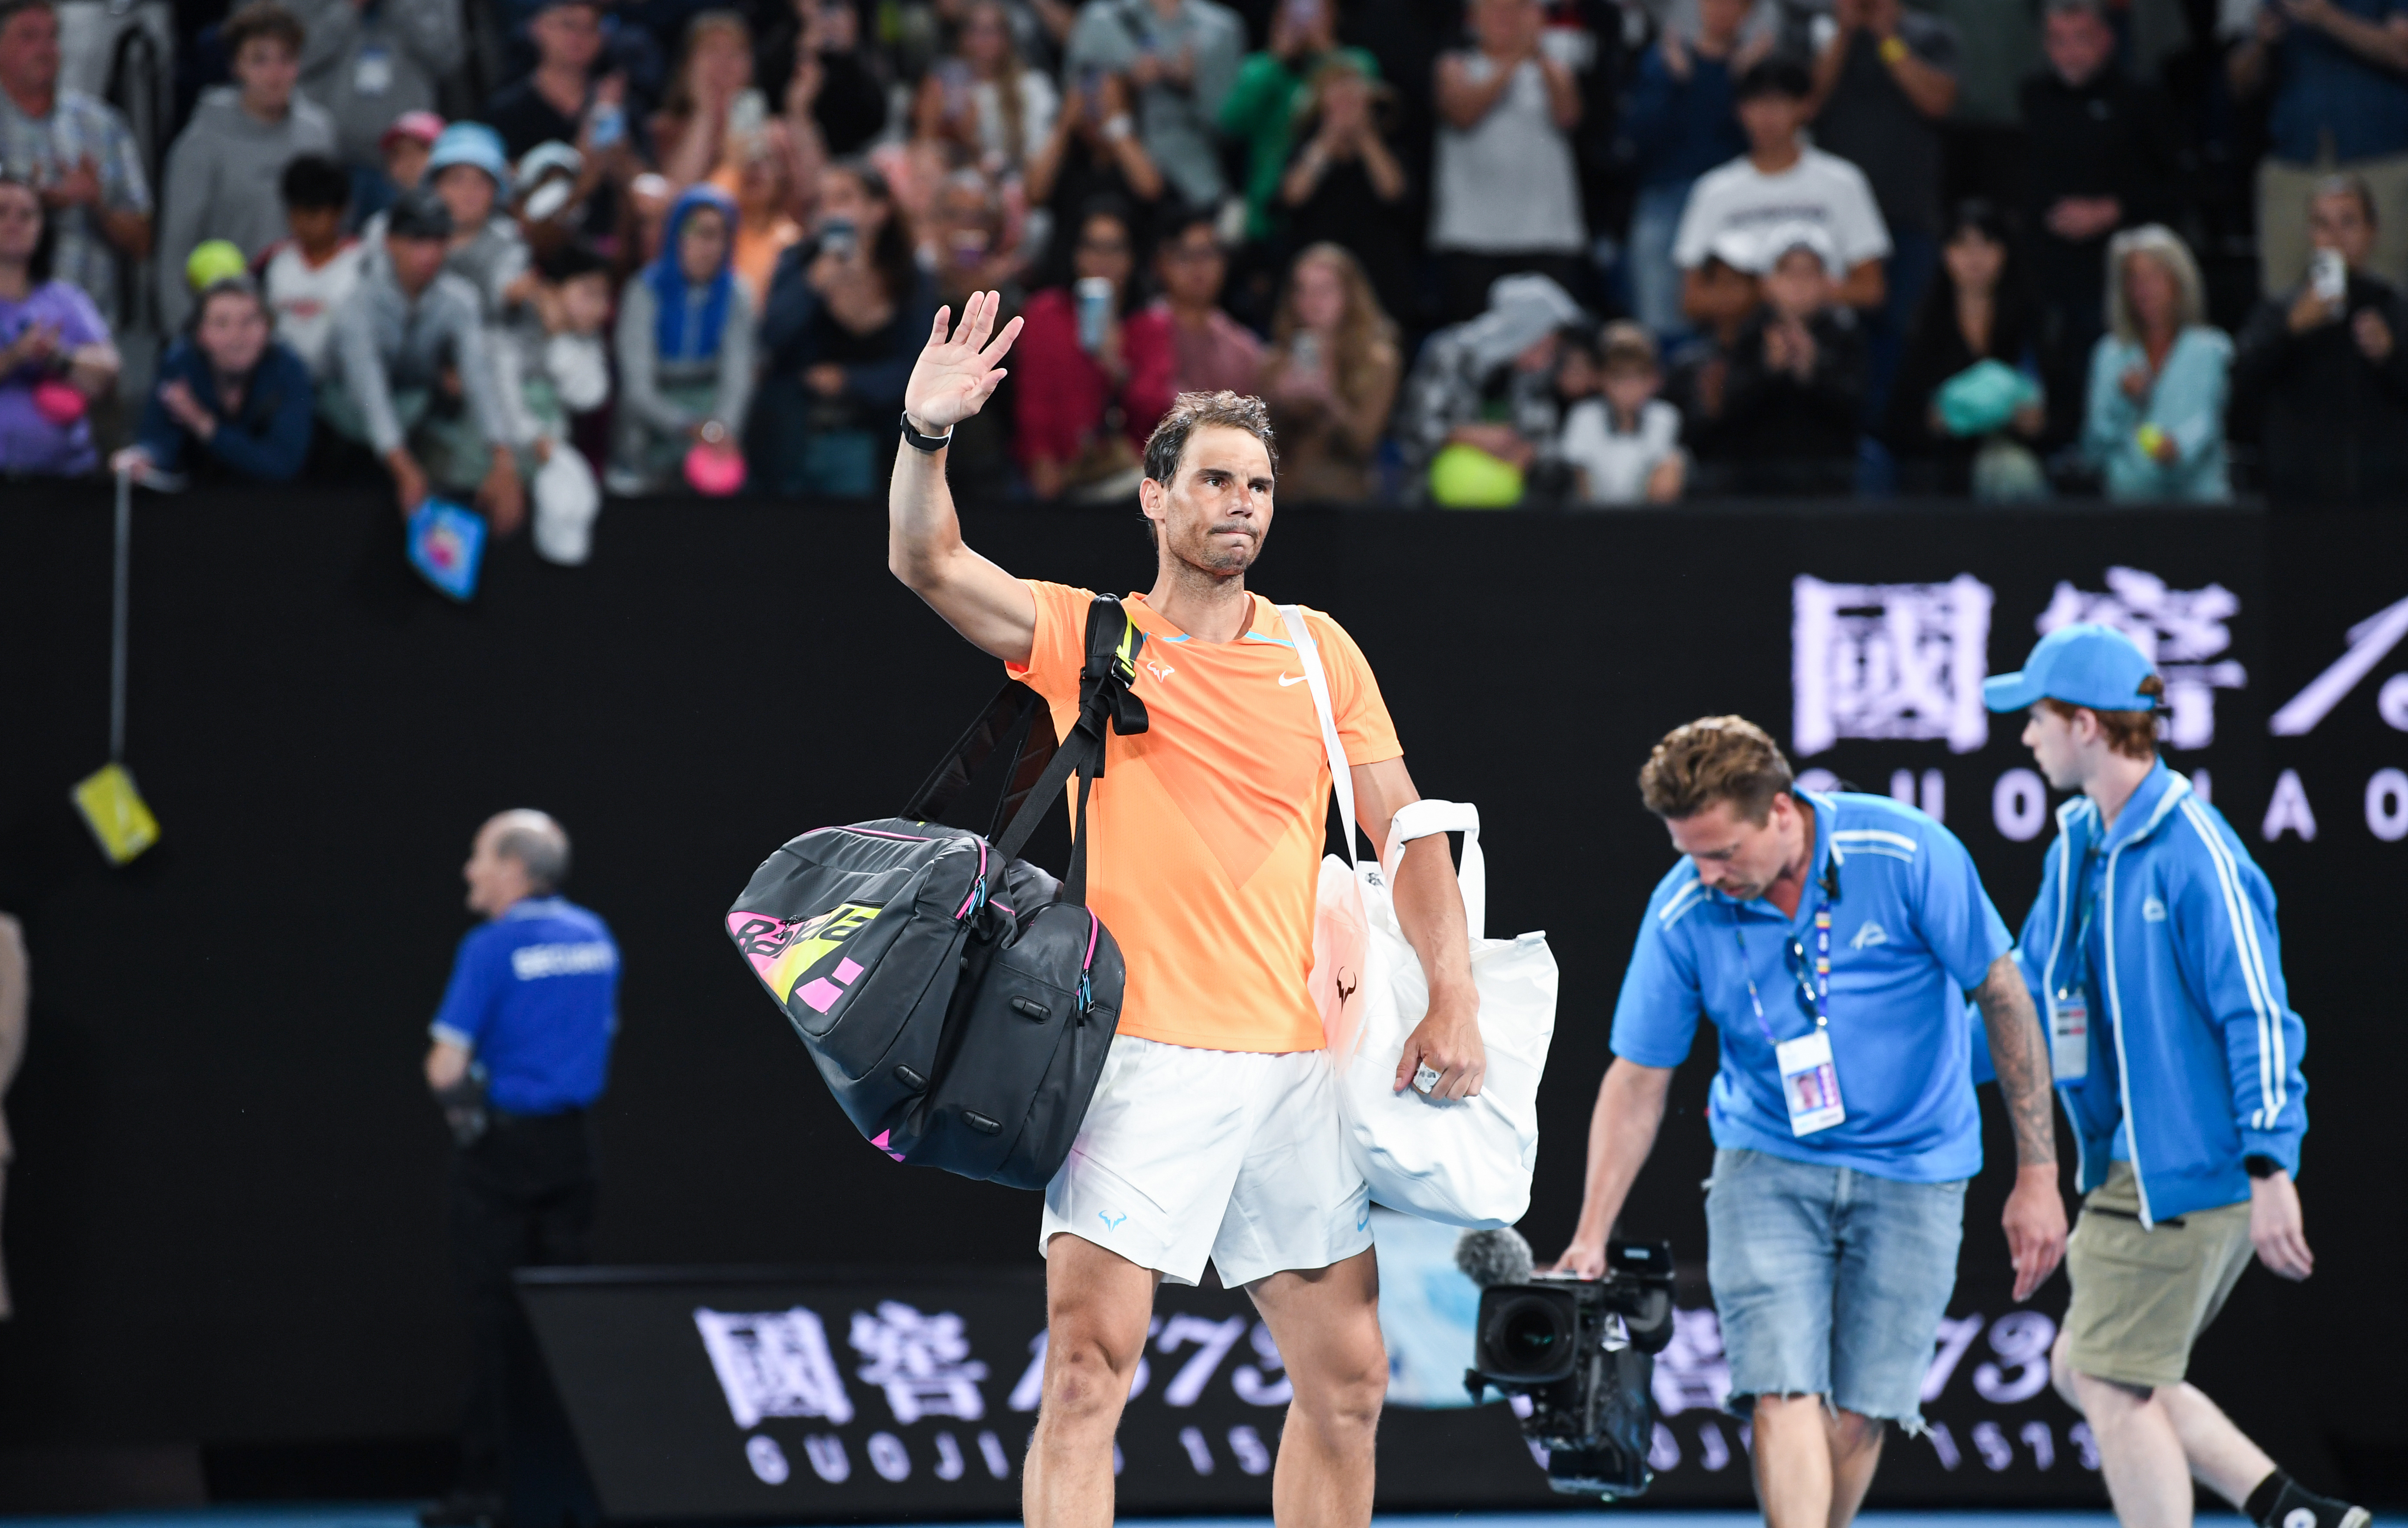 Rafael Nadal of Spain waves goodbye to the crowd on Rod Laver Arena after losing against Mackenzie McDonald of the United States. (Photo by James D. Morgan/Getty Images)